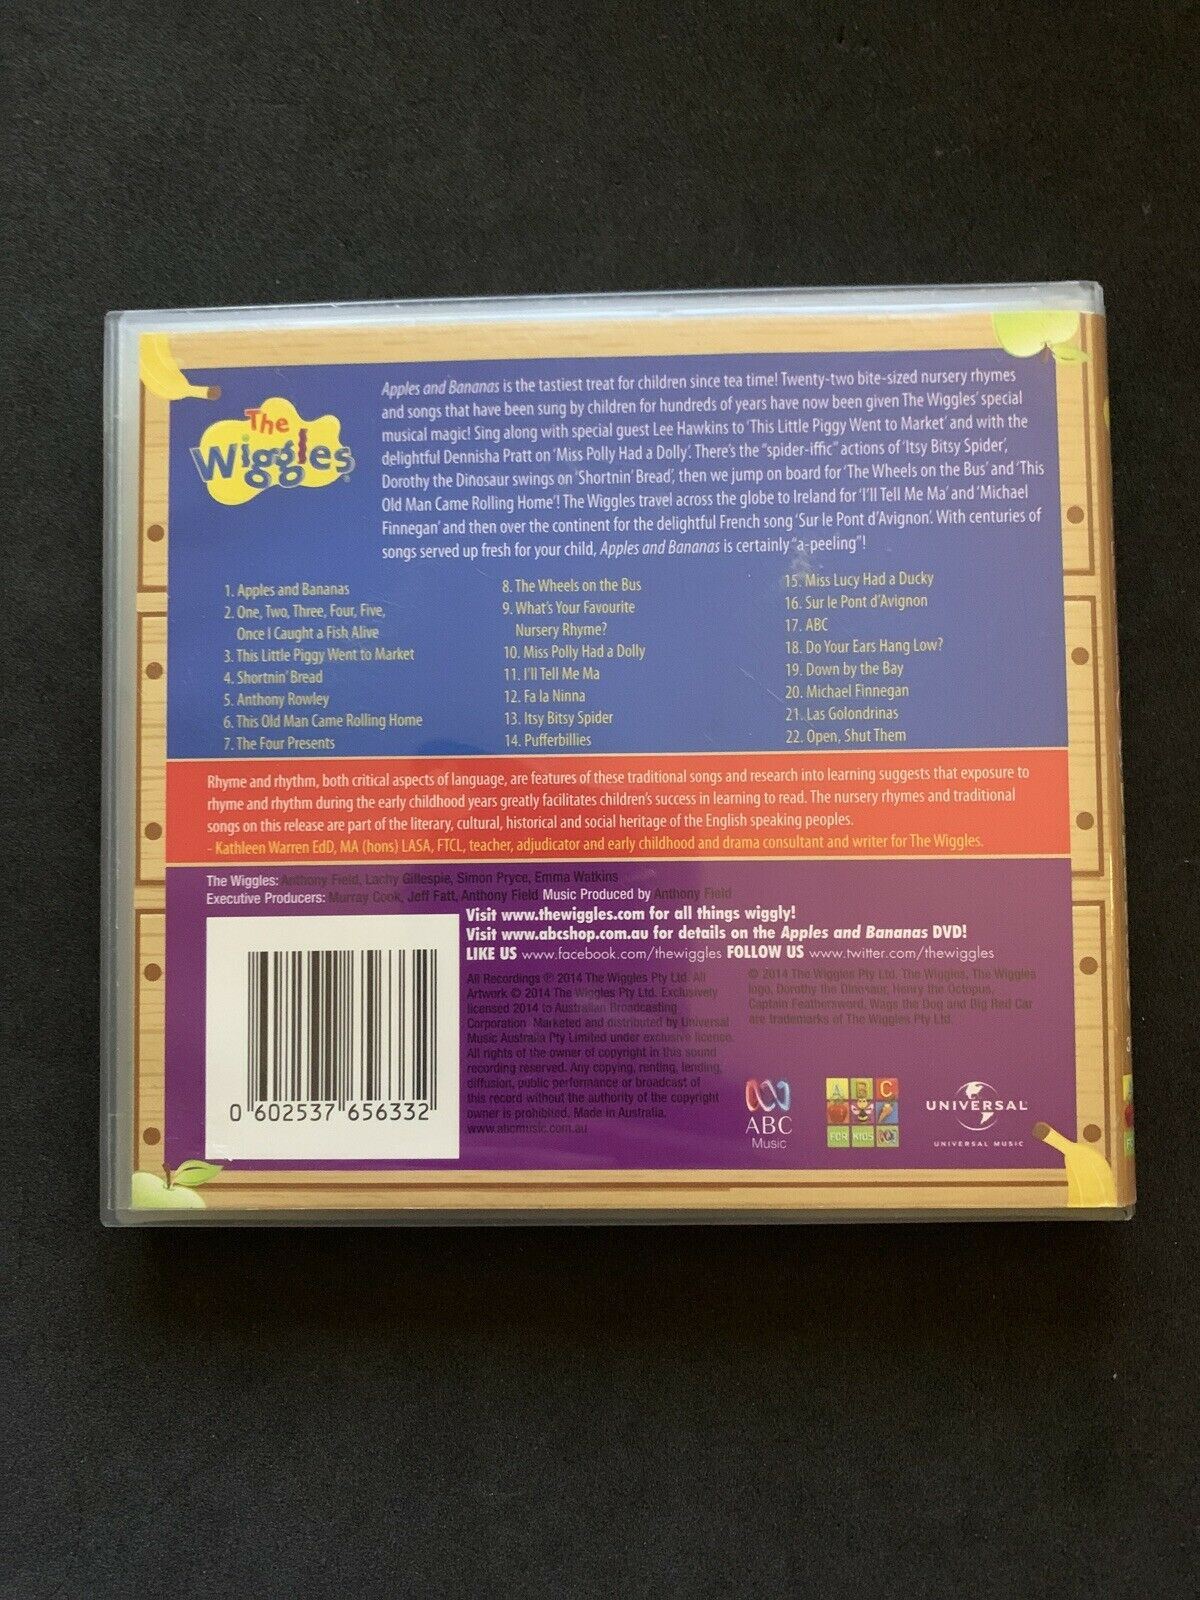 Apples & Bananas by The Wiggles (CD, ABC) A Wiggly Collection of Nursery Rhymes